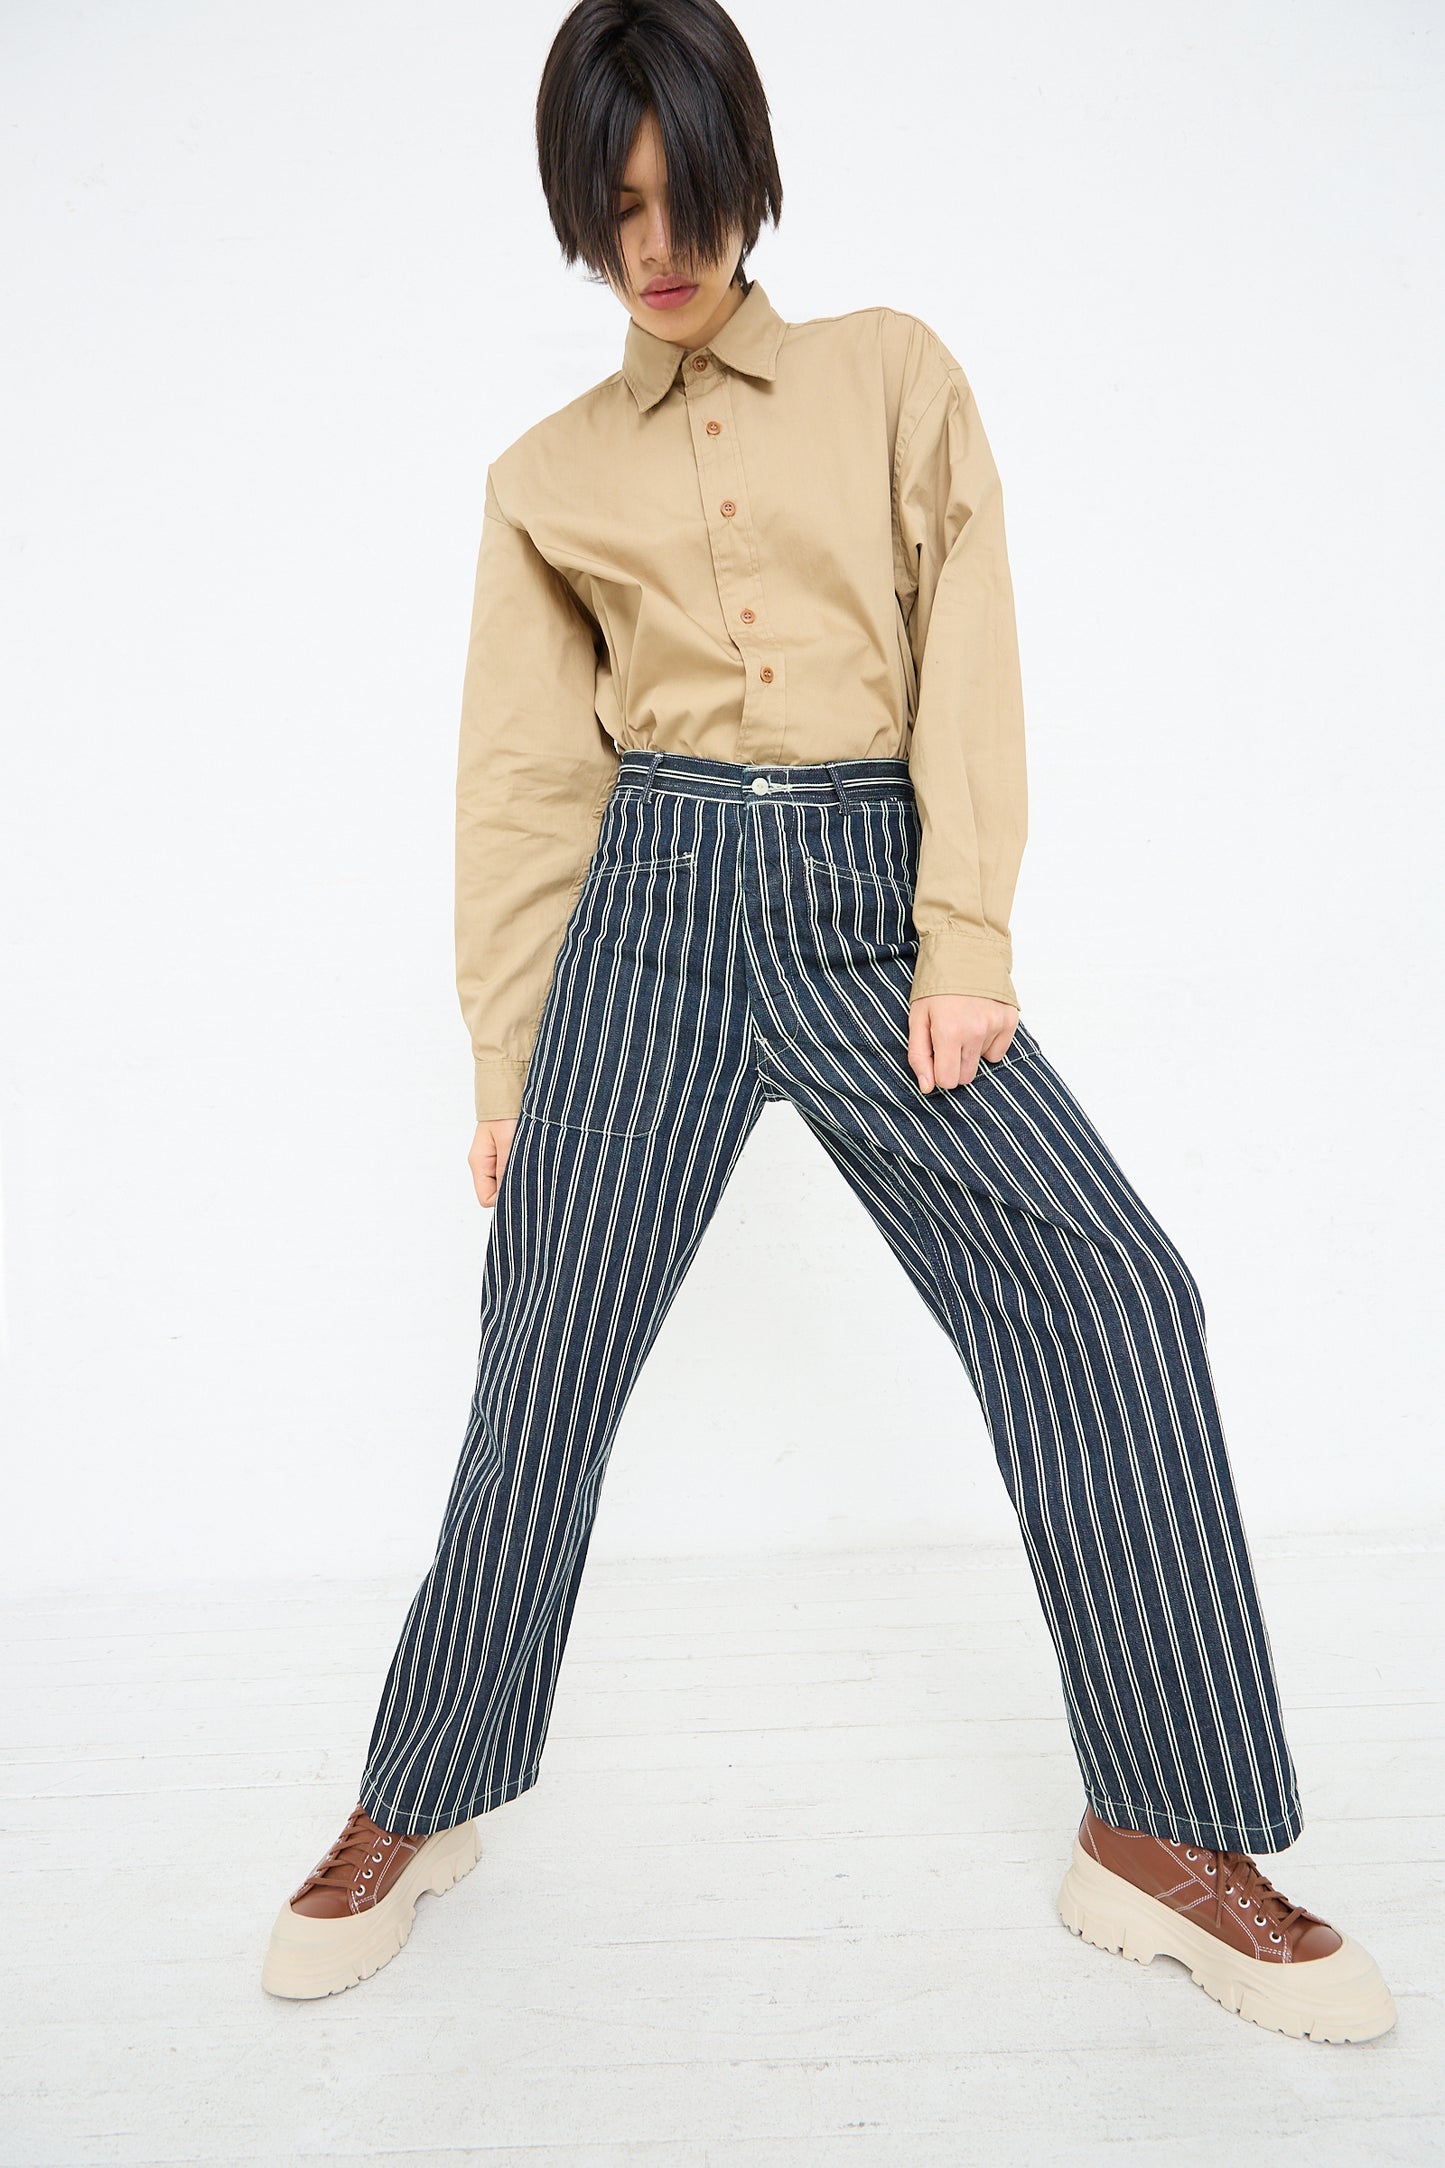 A person stands against a white background, wearing a beige button-up shirt, As Ever's Brancusi Pant in Indigo Denim Stripe, and two-toned shoes. They are facing forward with their hands.